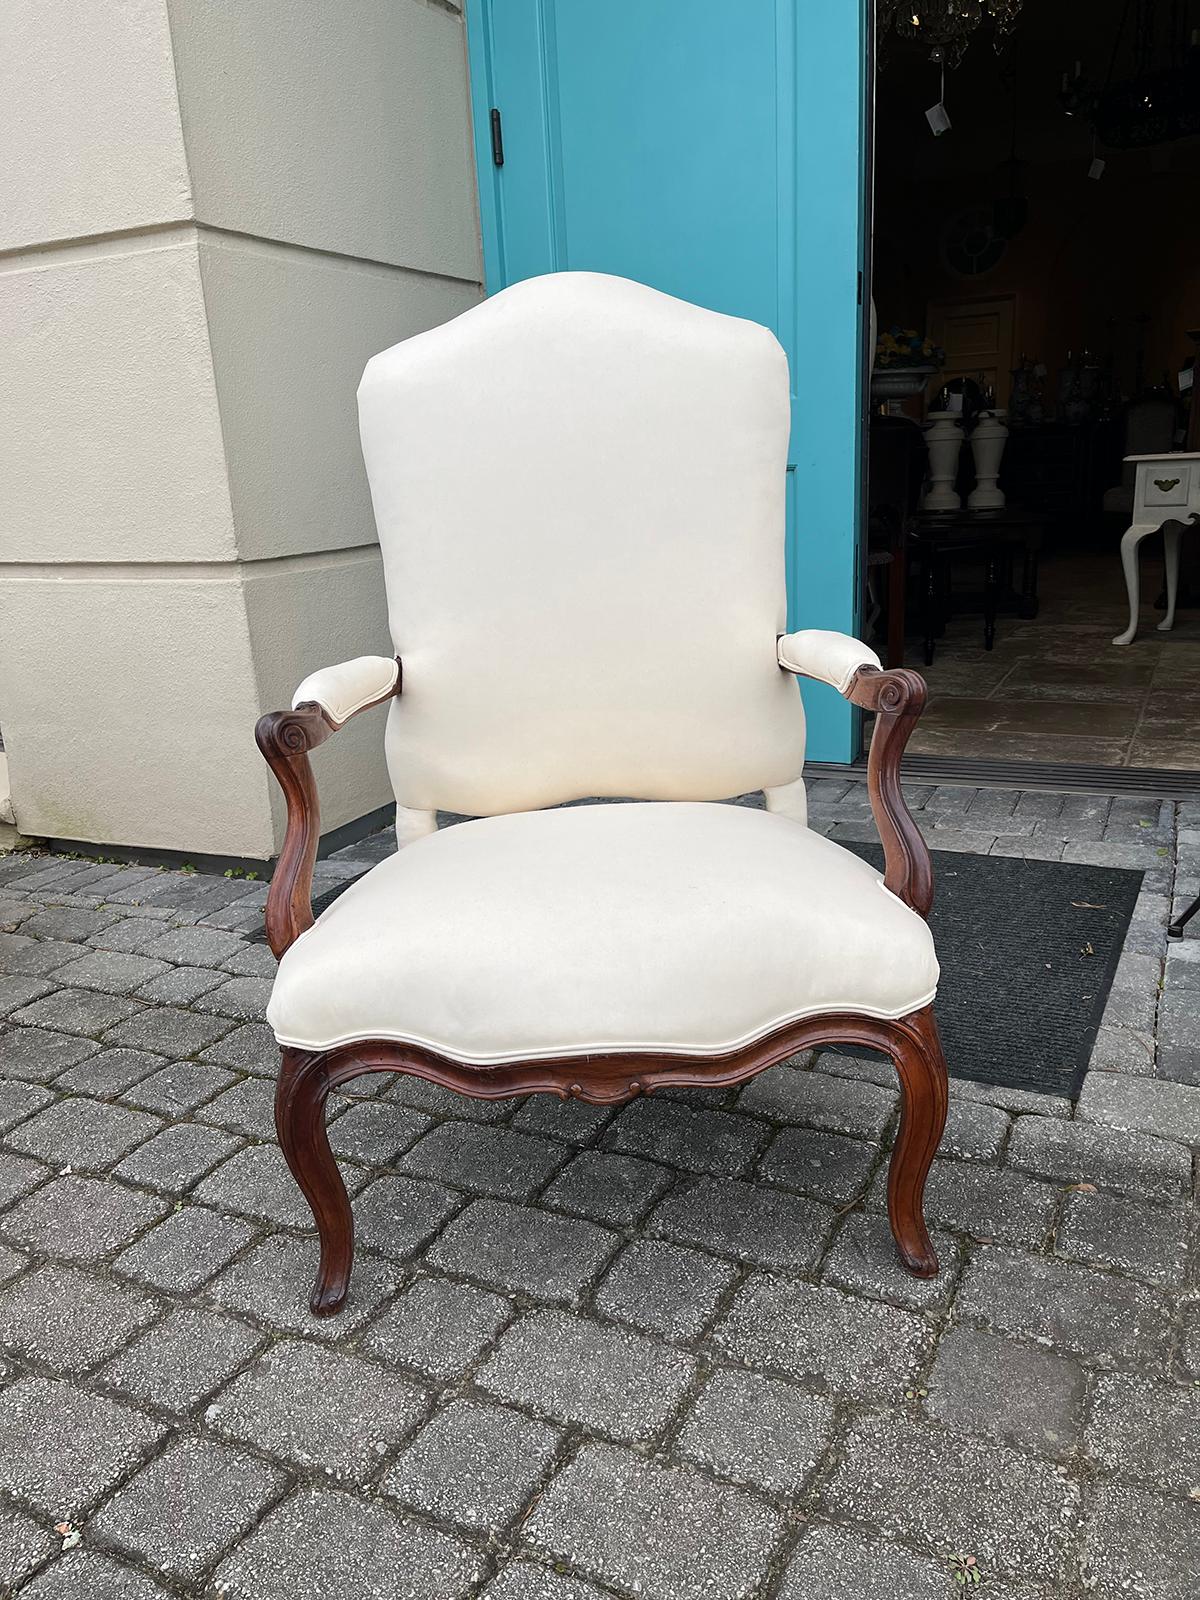 19th Century French Louis XV Style Armchair 
Measures: 27